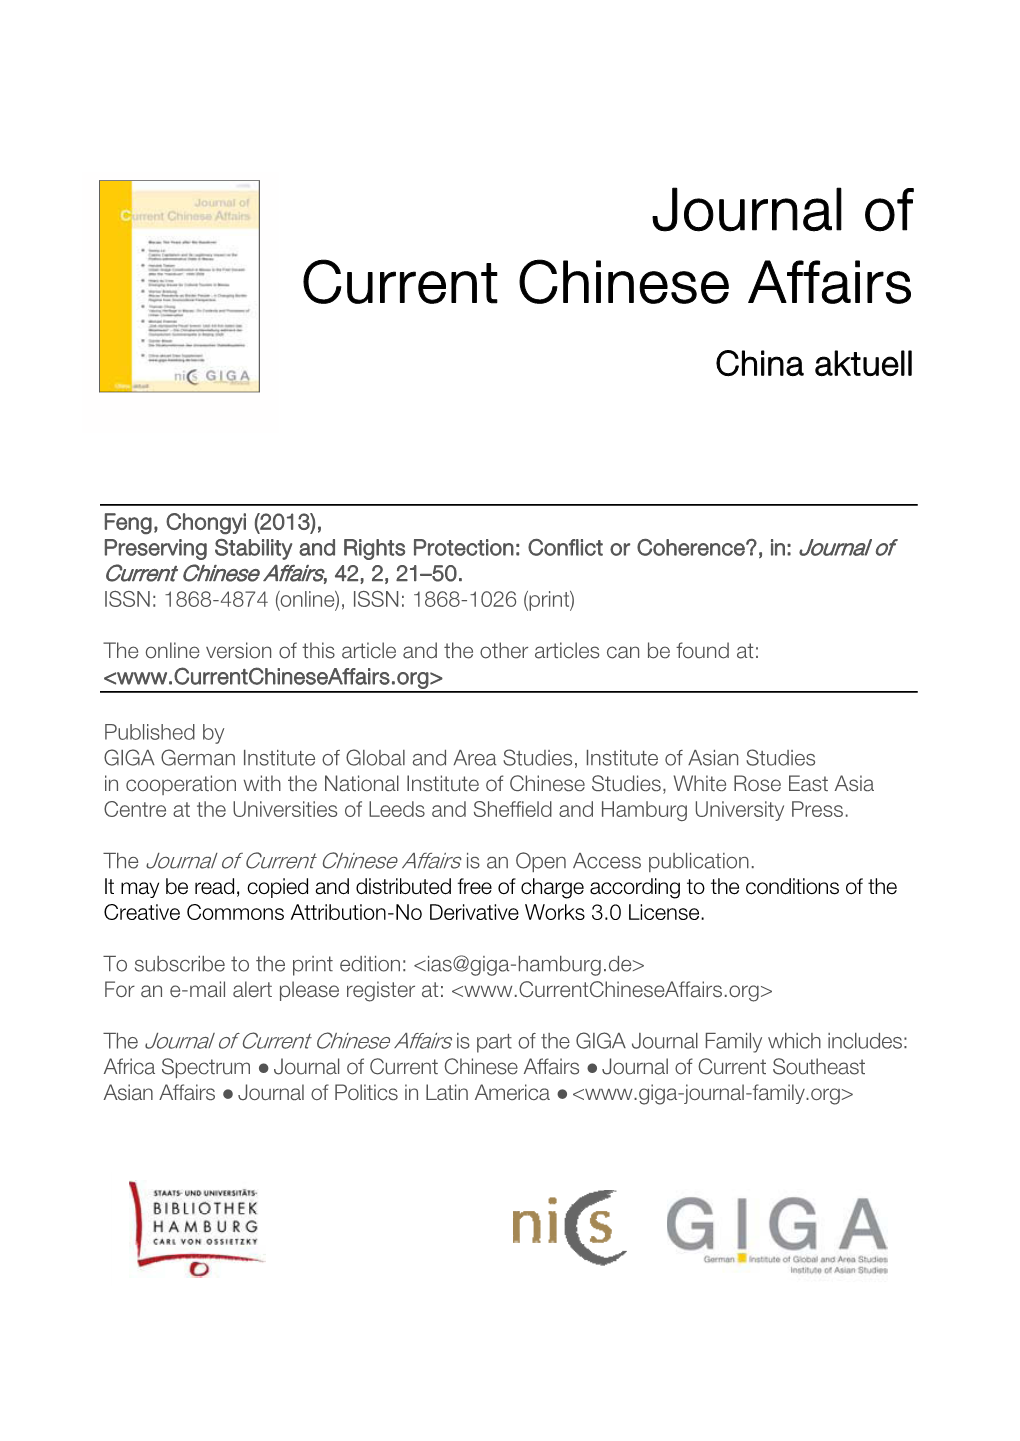 Preserving Stability and Rights Protection: Conflict Or Coherence?, In: Journal of Current Chinese Affairs, 42, 2, 21–50